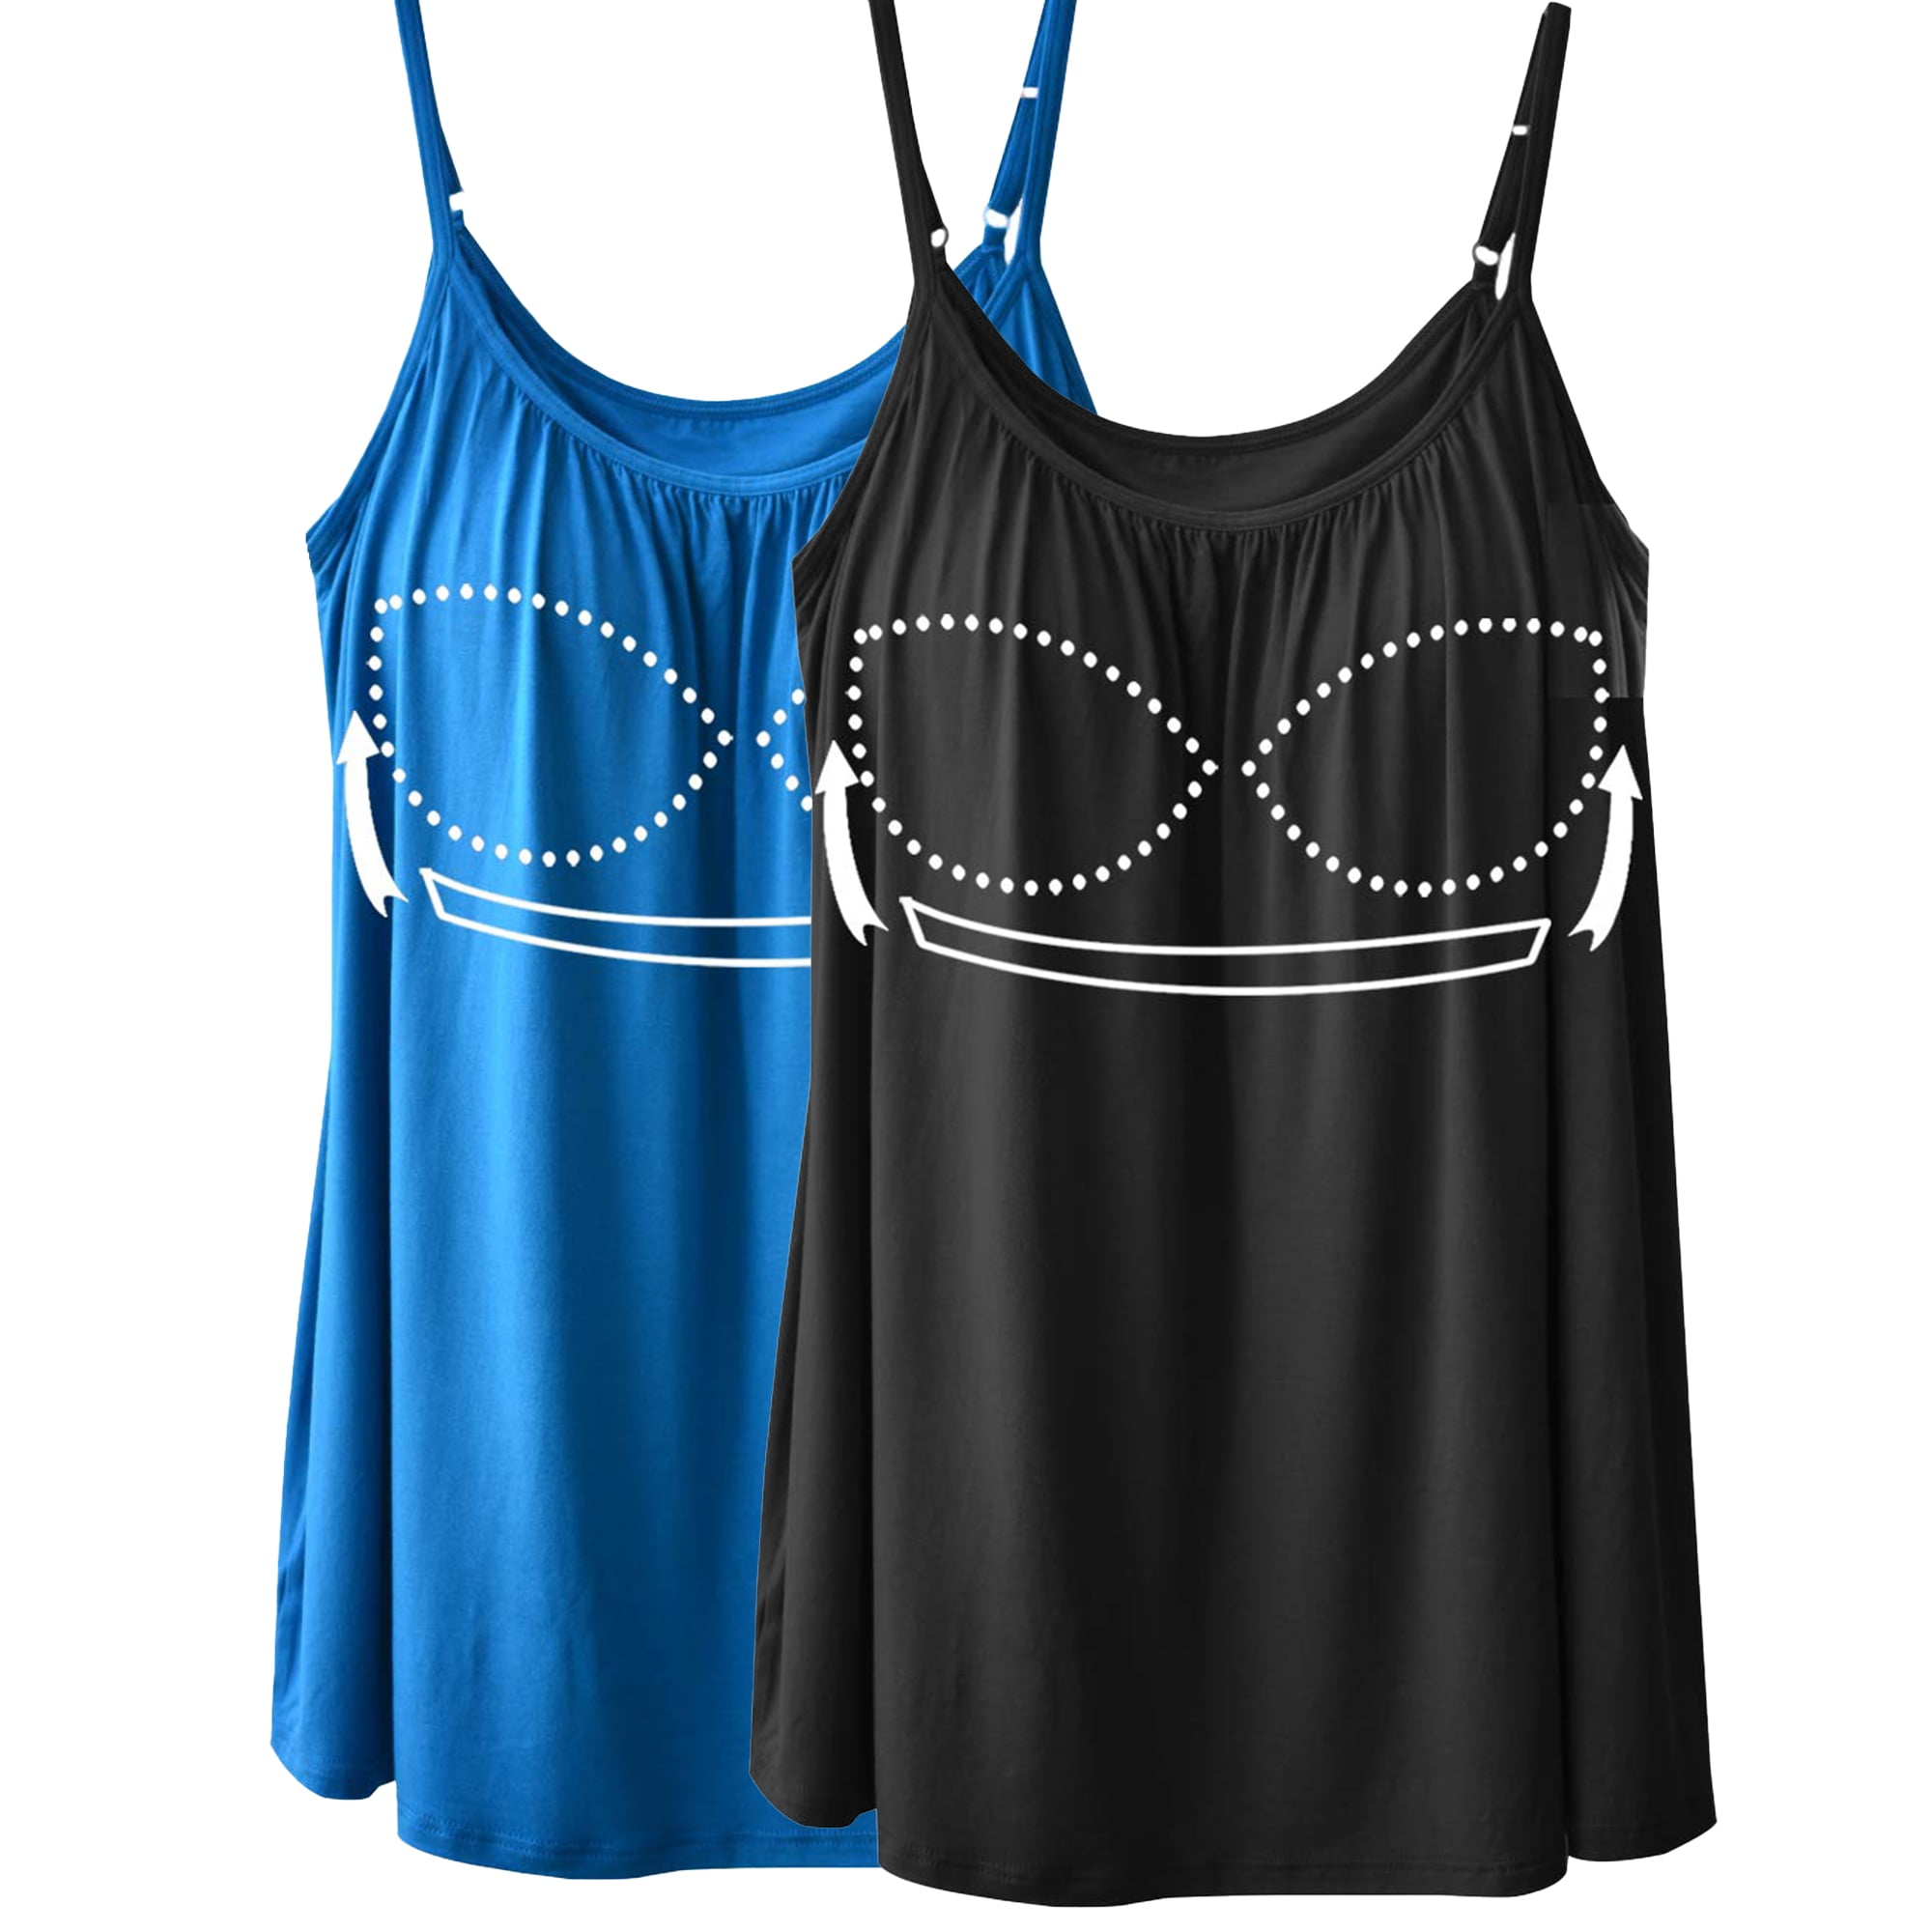 CARCOS Camisoles for Women with Built in Bra Adjustable Straps